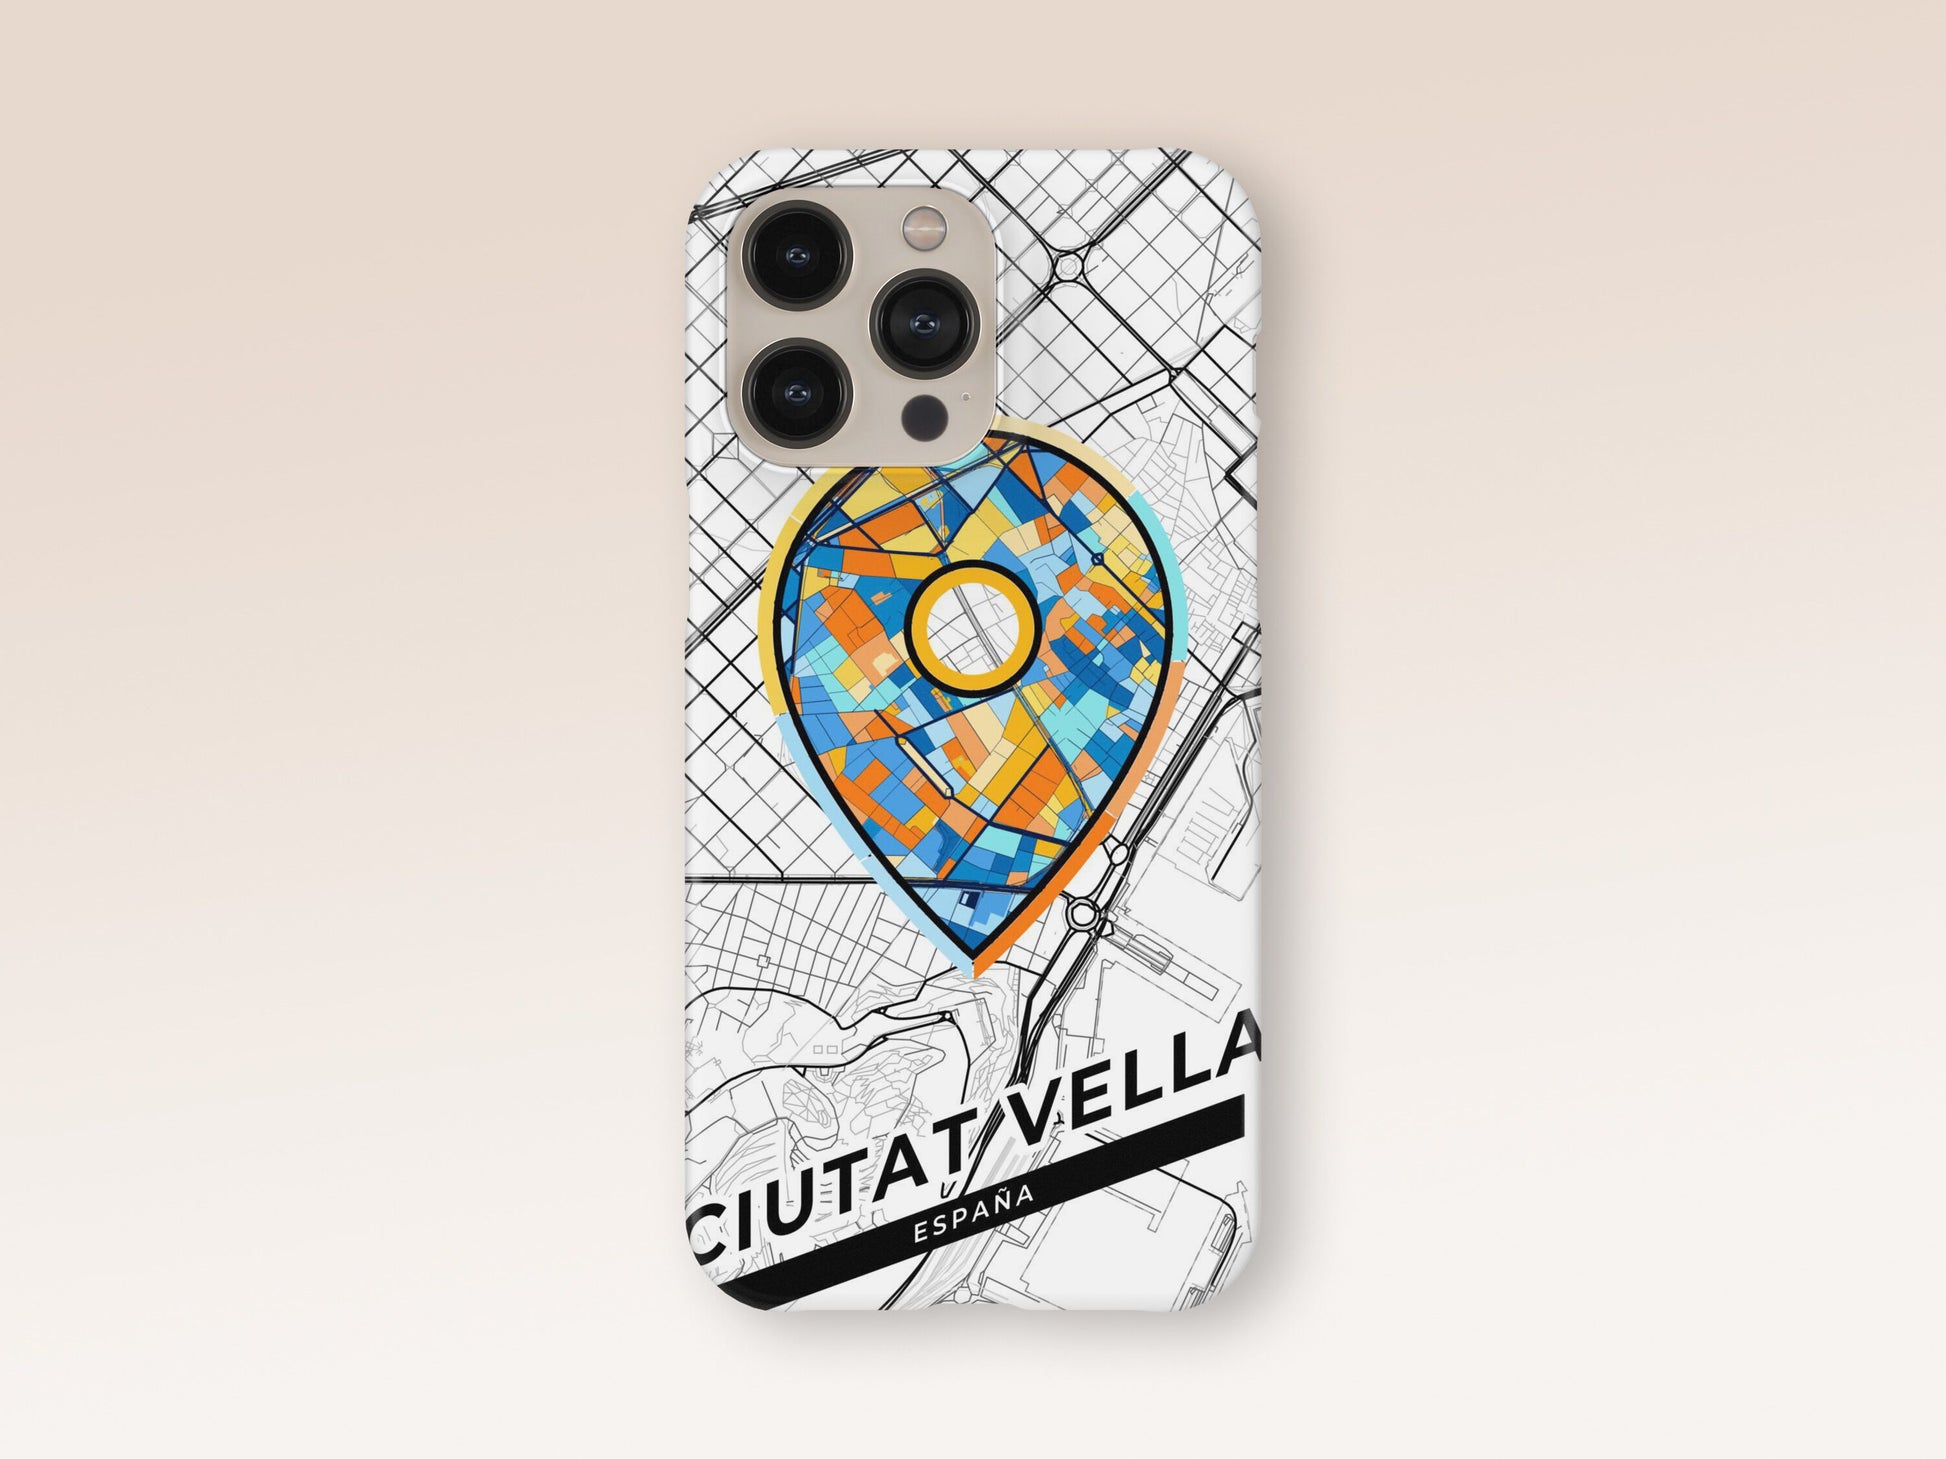 Ciutat Vella Spain slim phone case with colorful icon. Birthday, wedding or housewarming gift. Couple match cases. 1